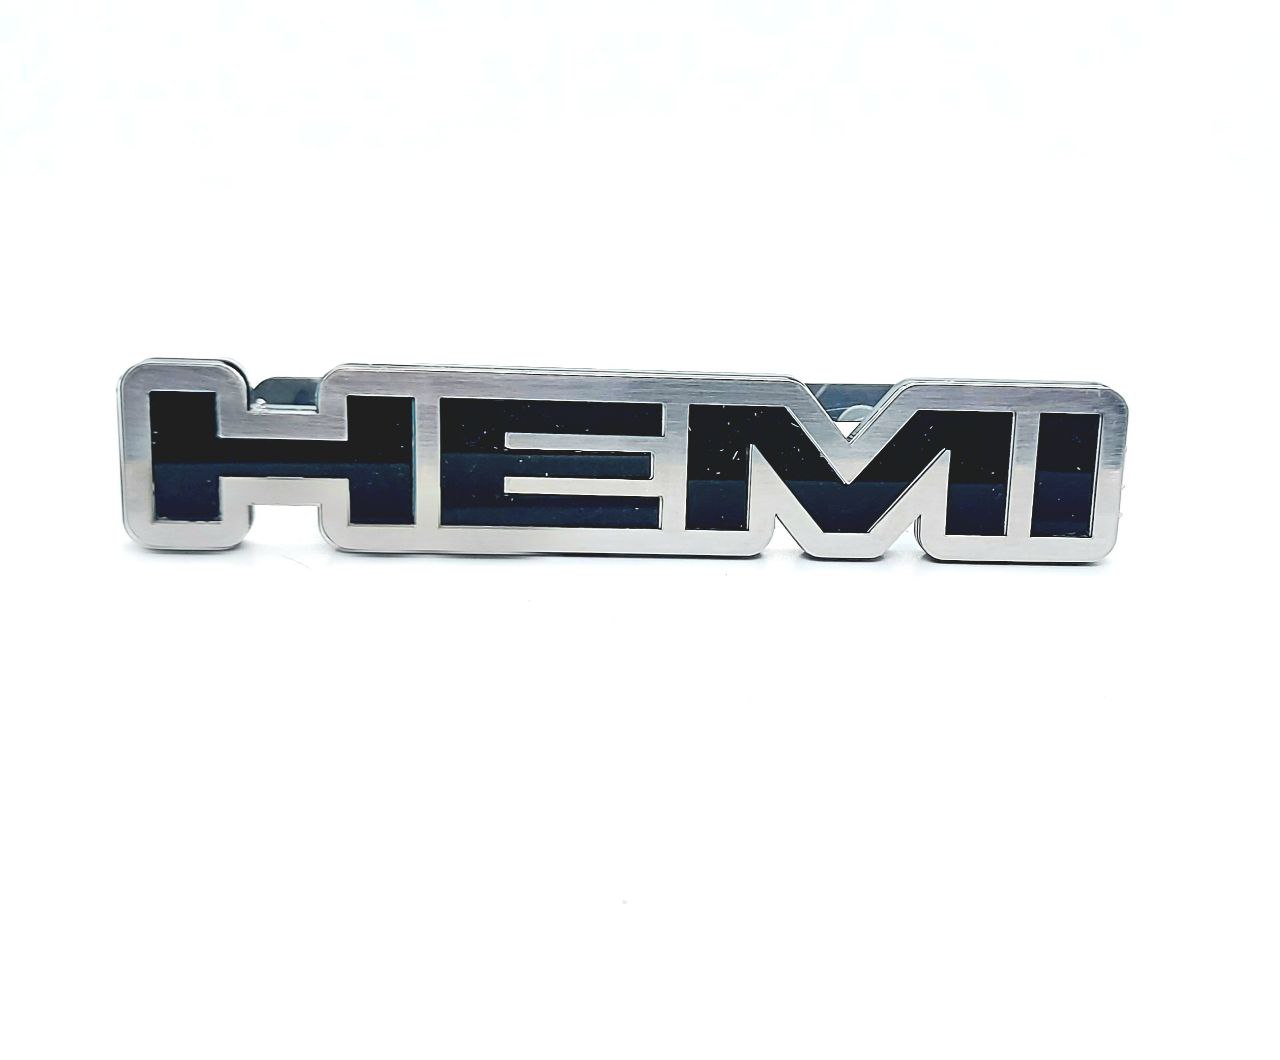 Dodge Stainless Steel tailgate trunk rear emblem with HEMI logo - decoinfabric